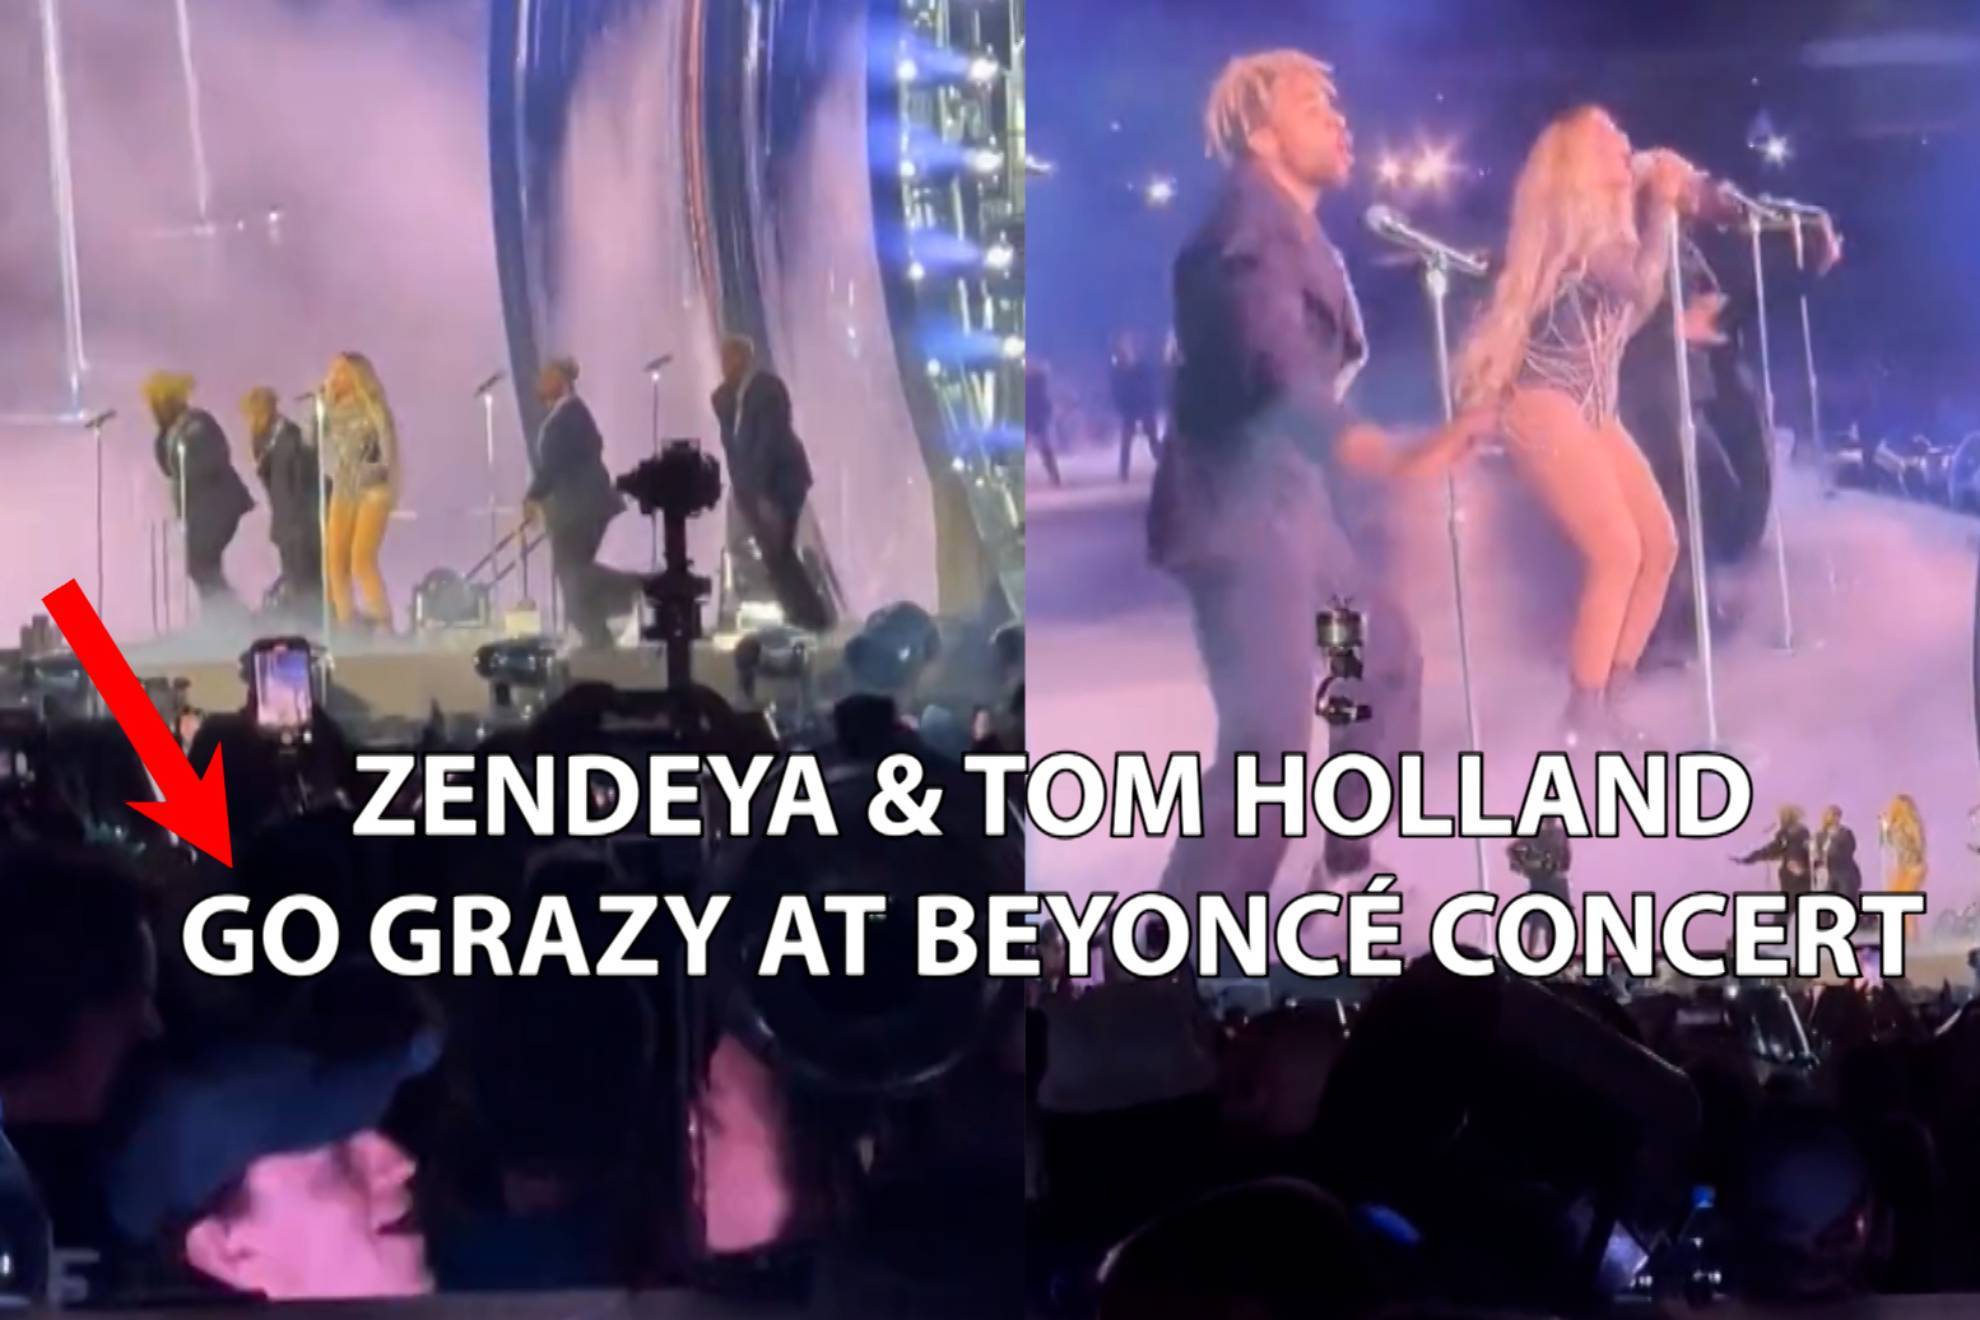 Tom Holland and Zendeya spotted singing and dancing together at Beyonc concert